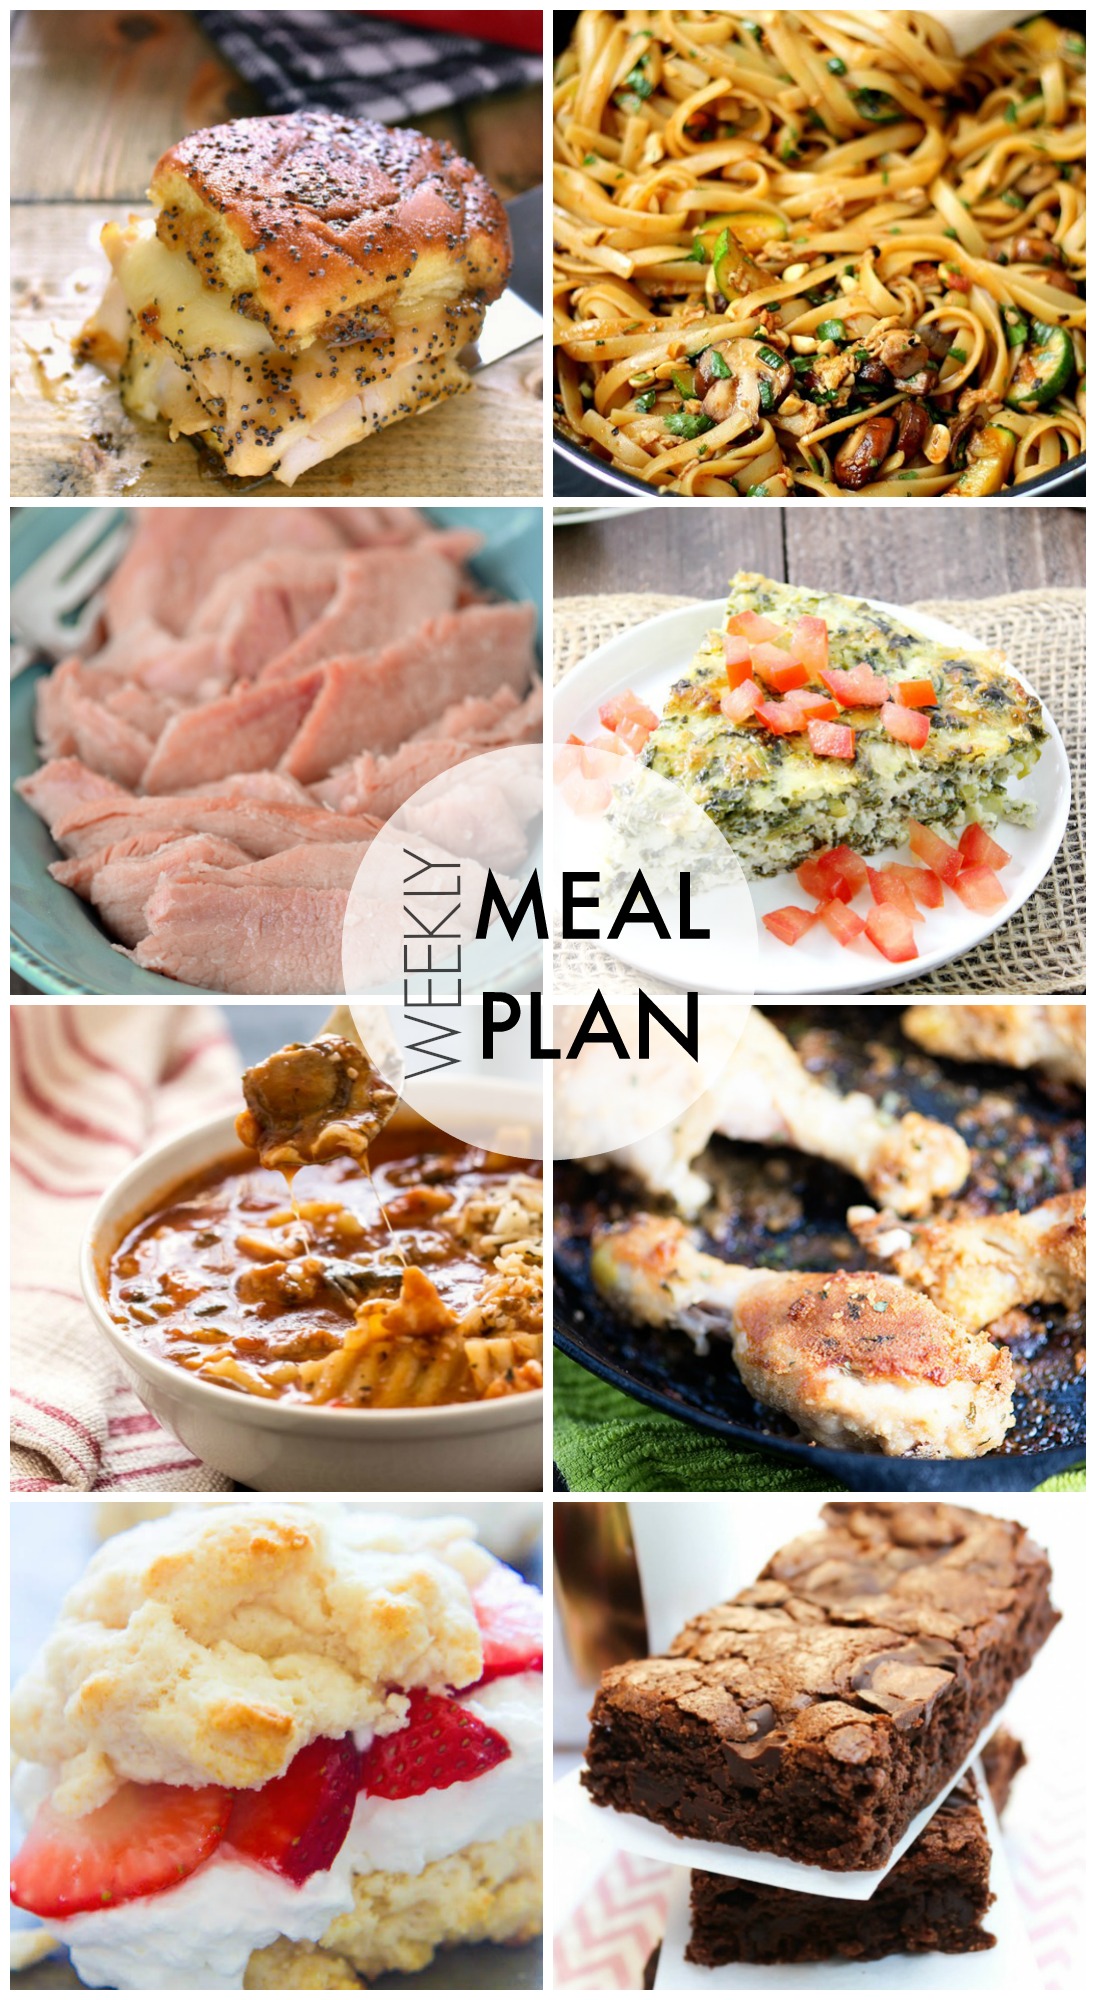 Easy Meal Plan Sunday